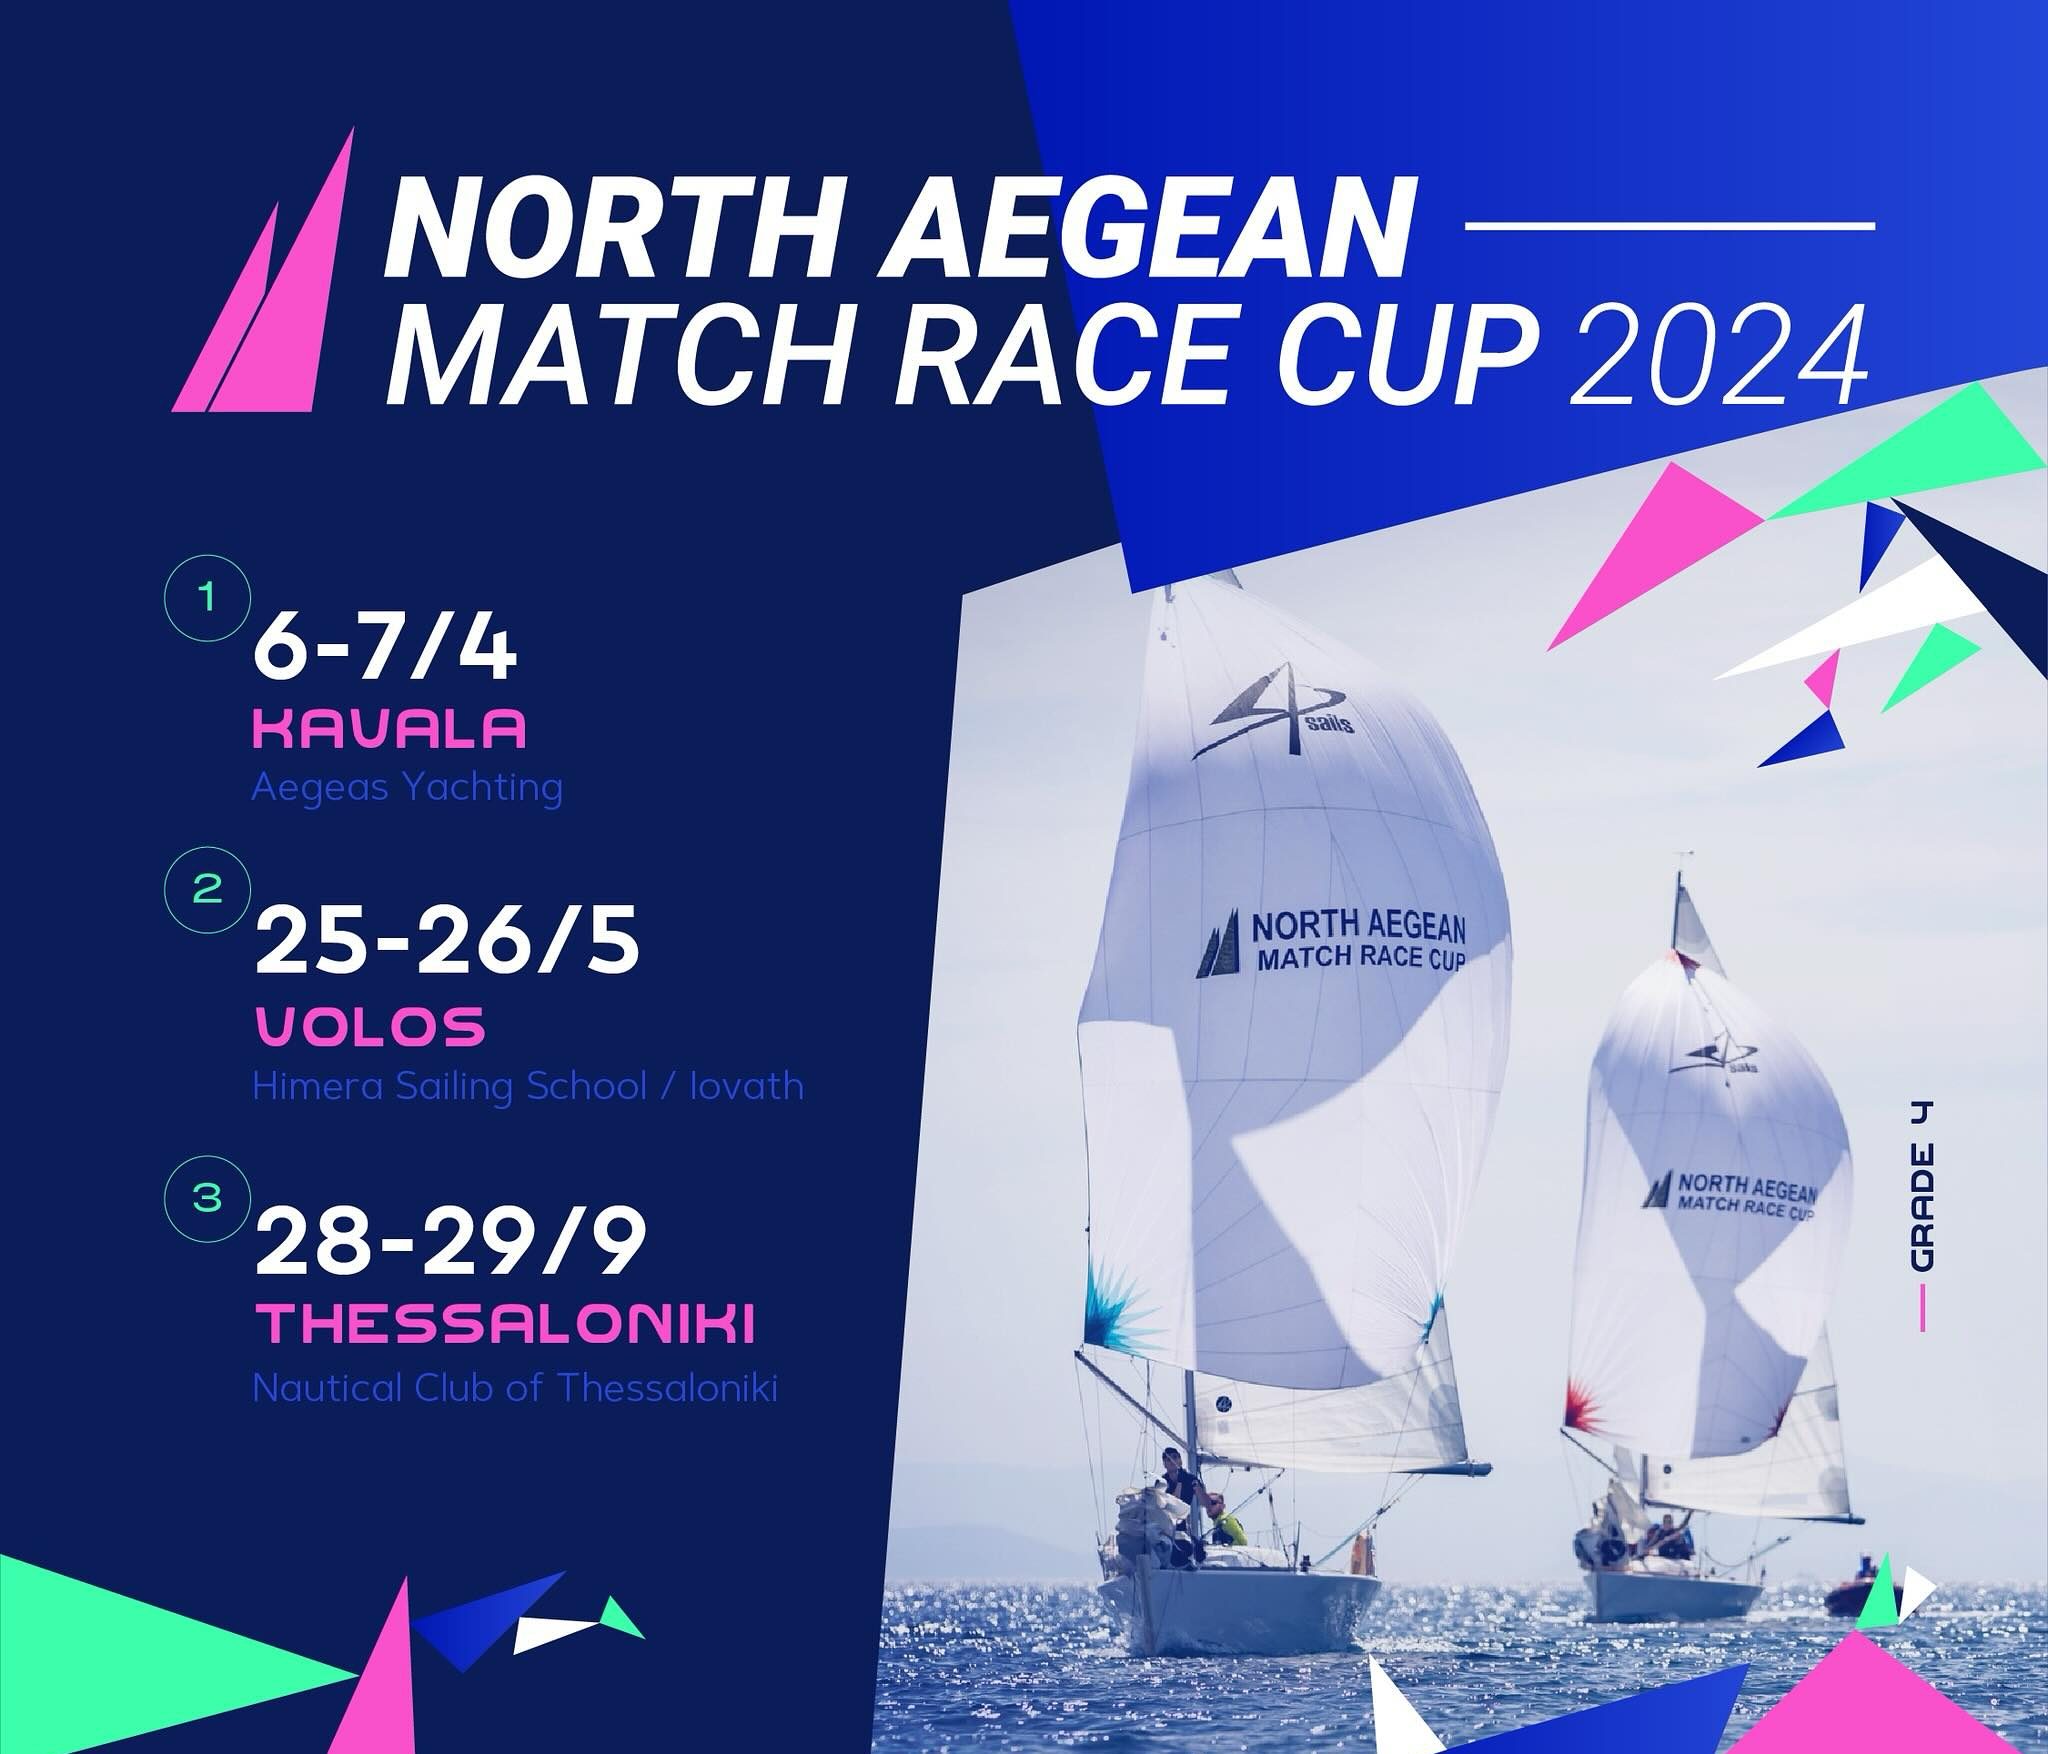 North Aegean Match Race Cup 2024